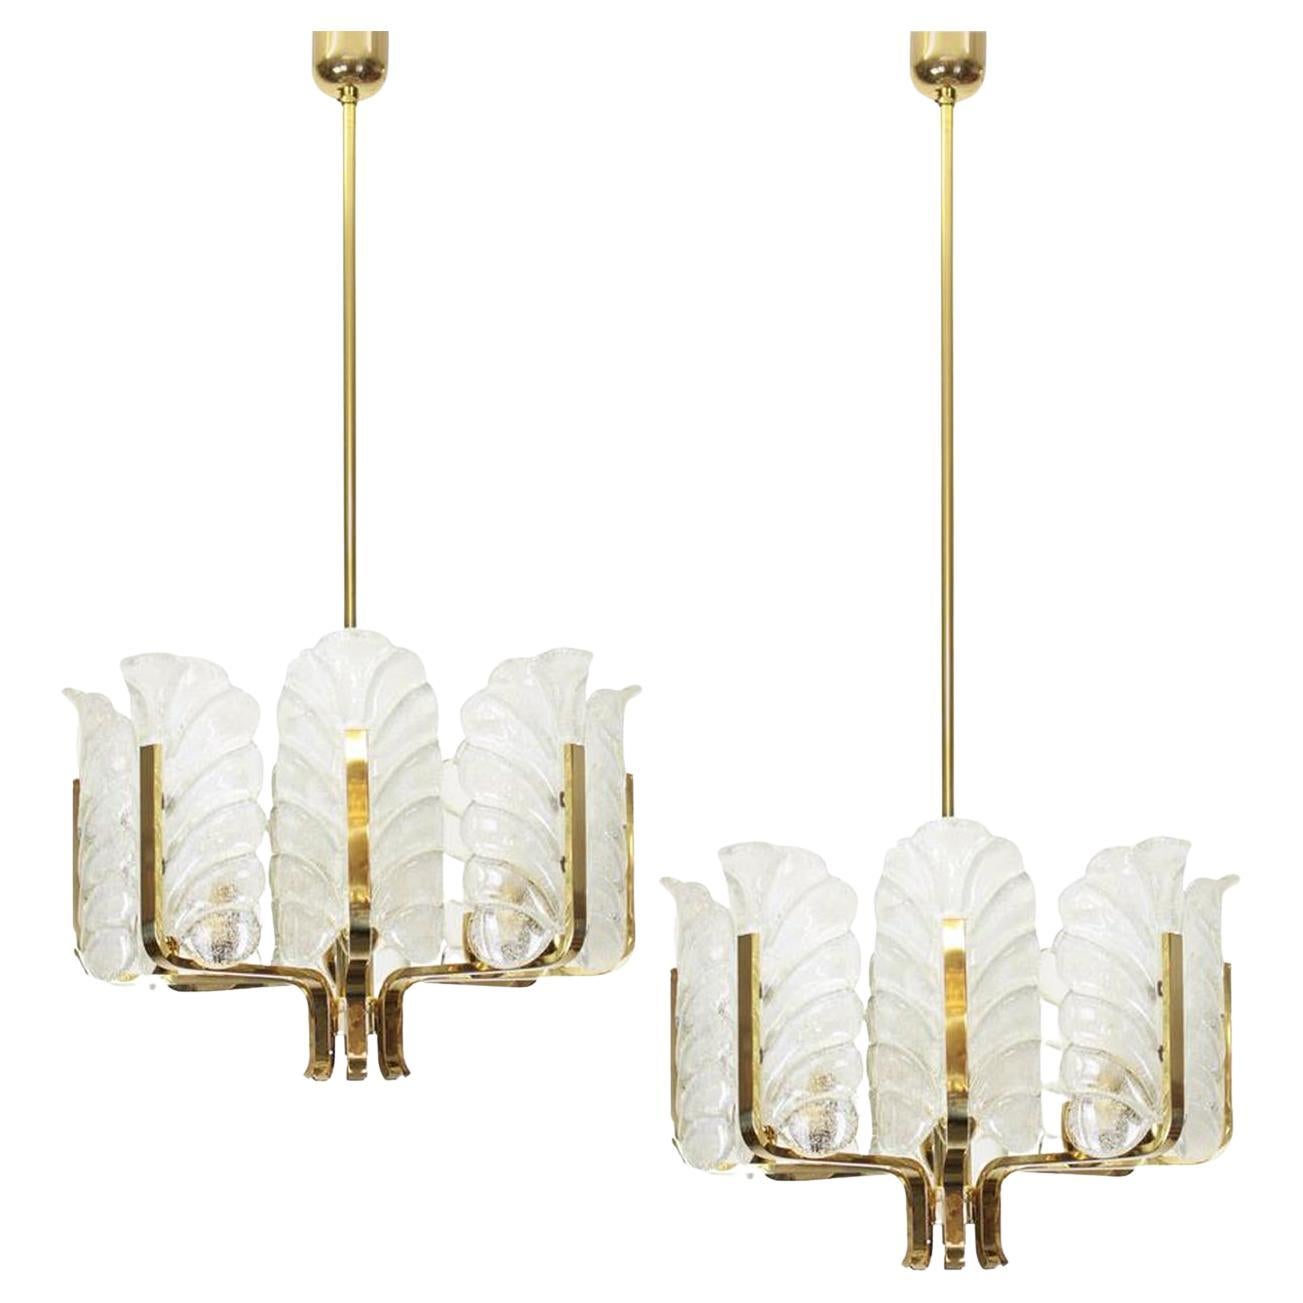 One of the Six Large Fagerlund Glass Leaves Brass Chandelier by Orrefors, 1960s For Sale